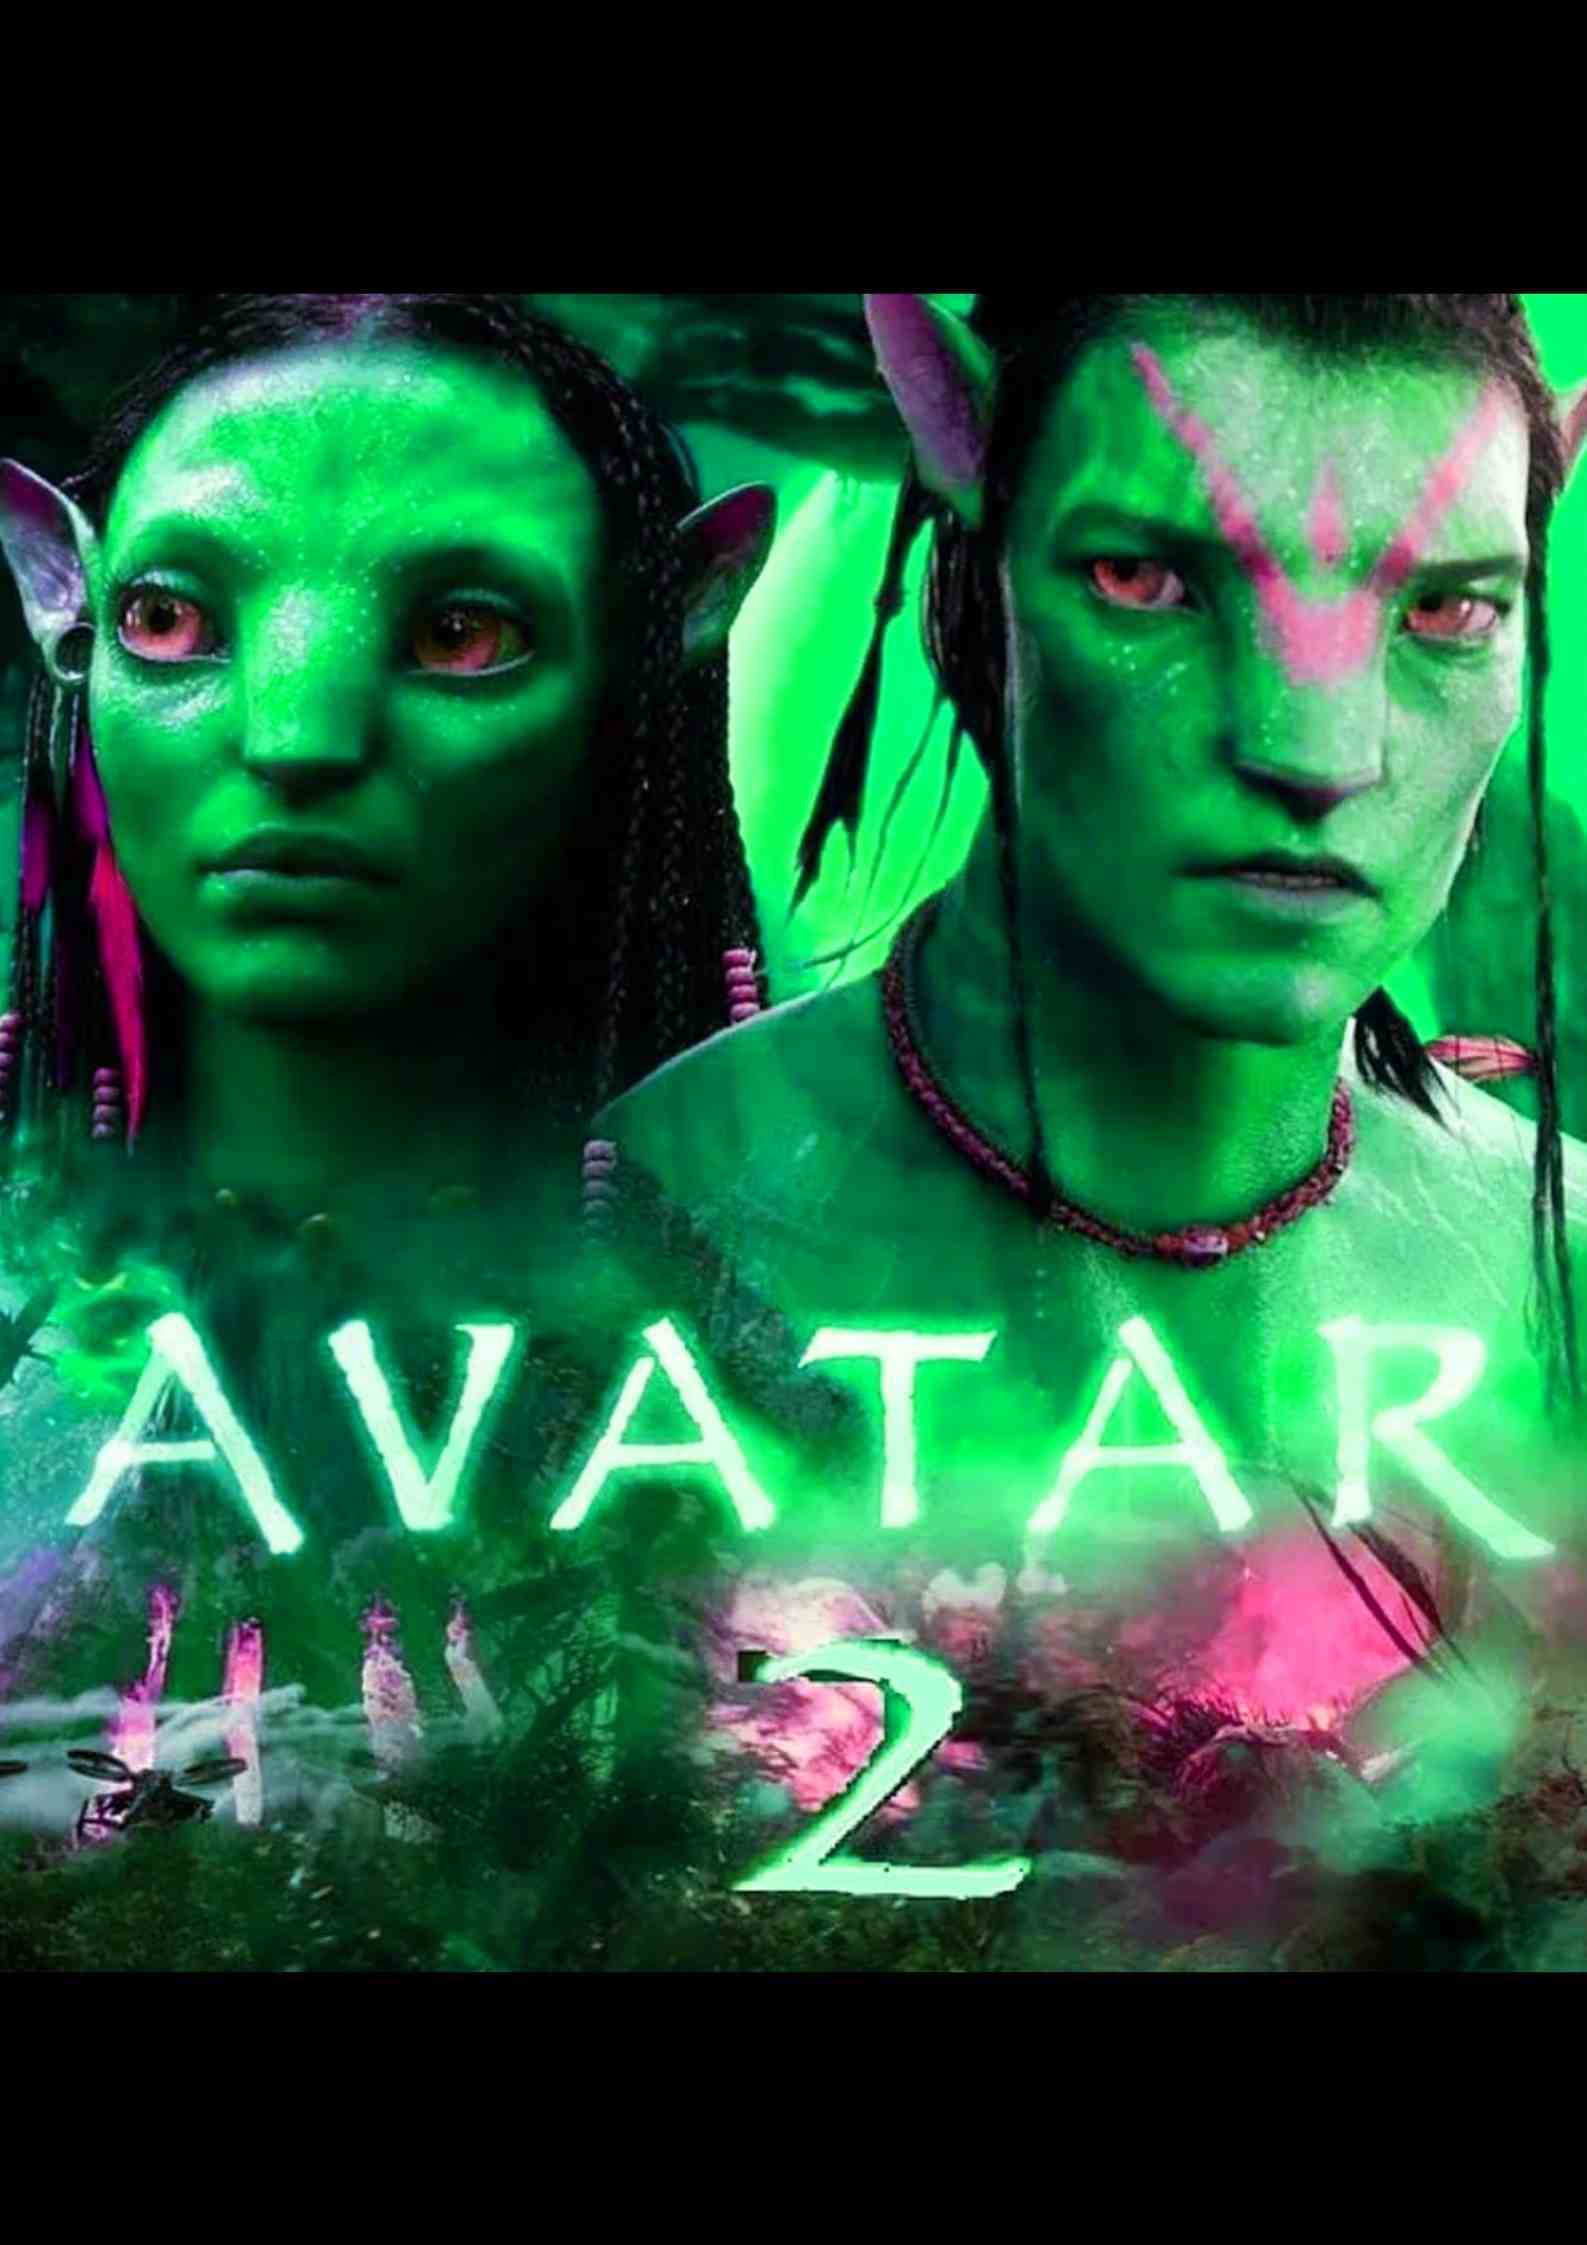 Avatar 2 Parents Guide | Avatar 2 Age Rating | 2022